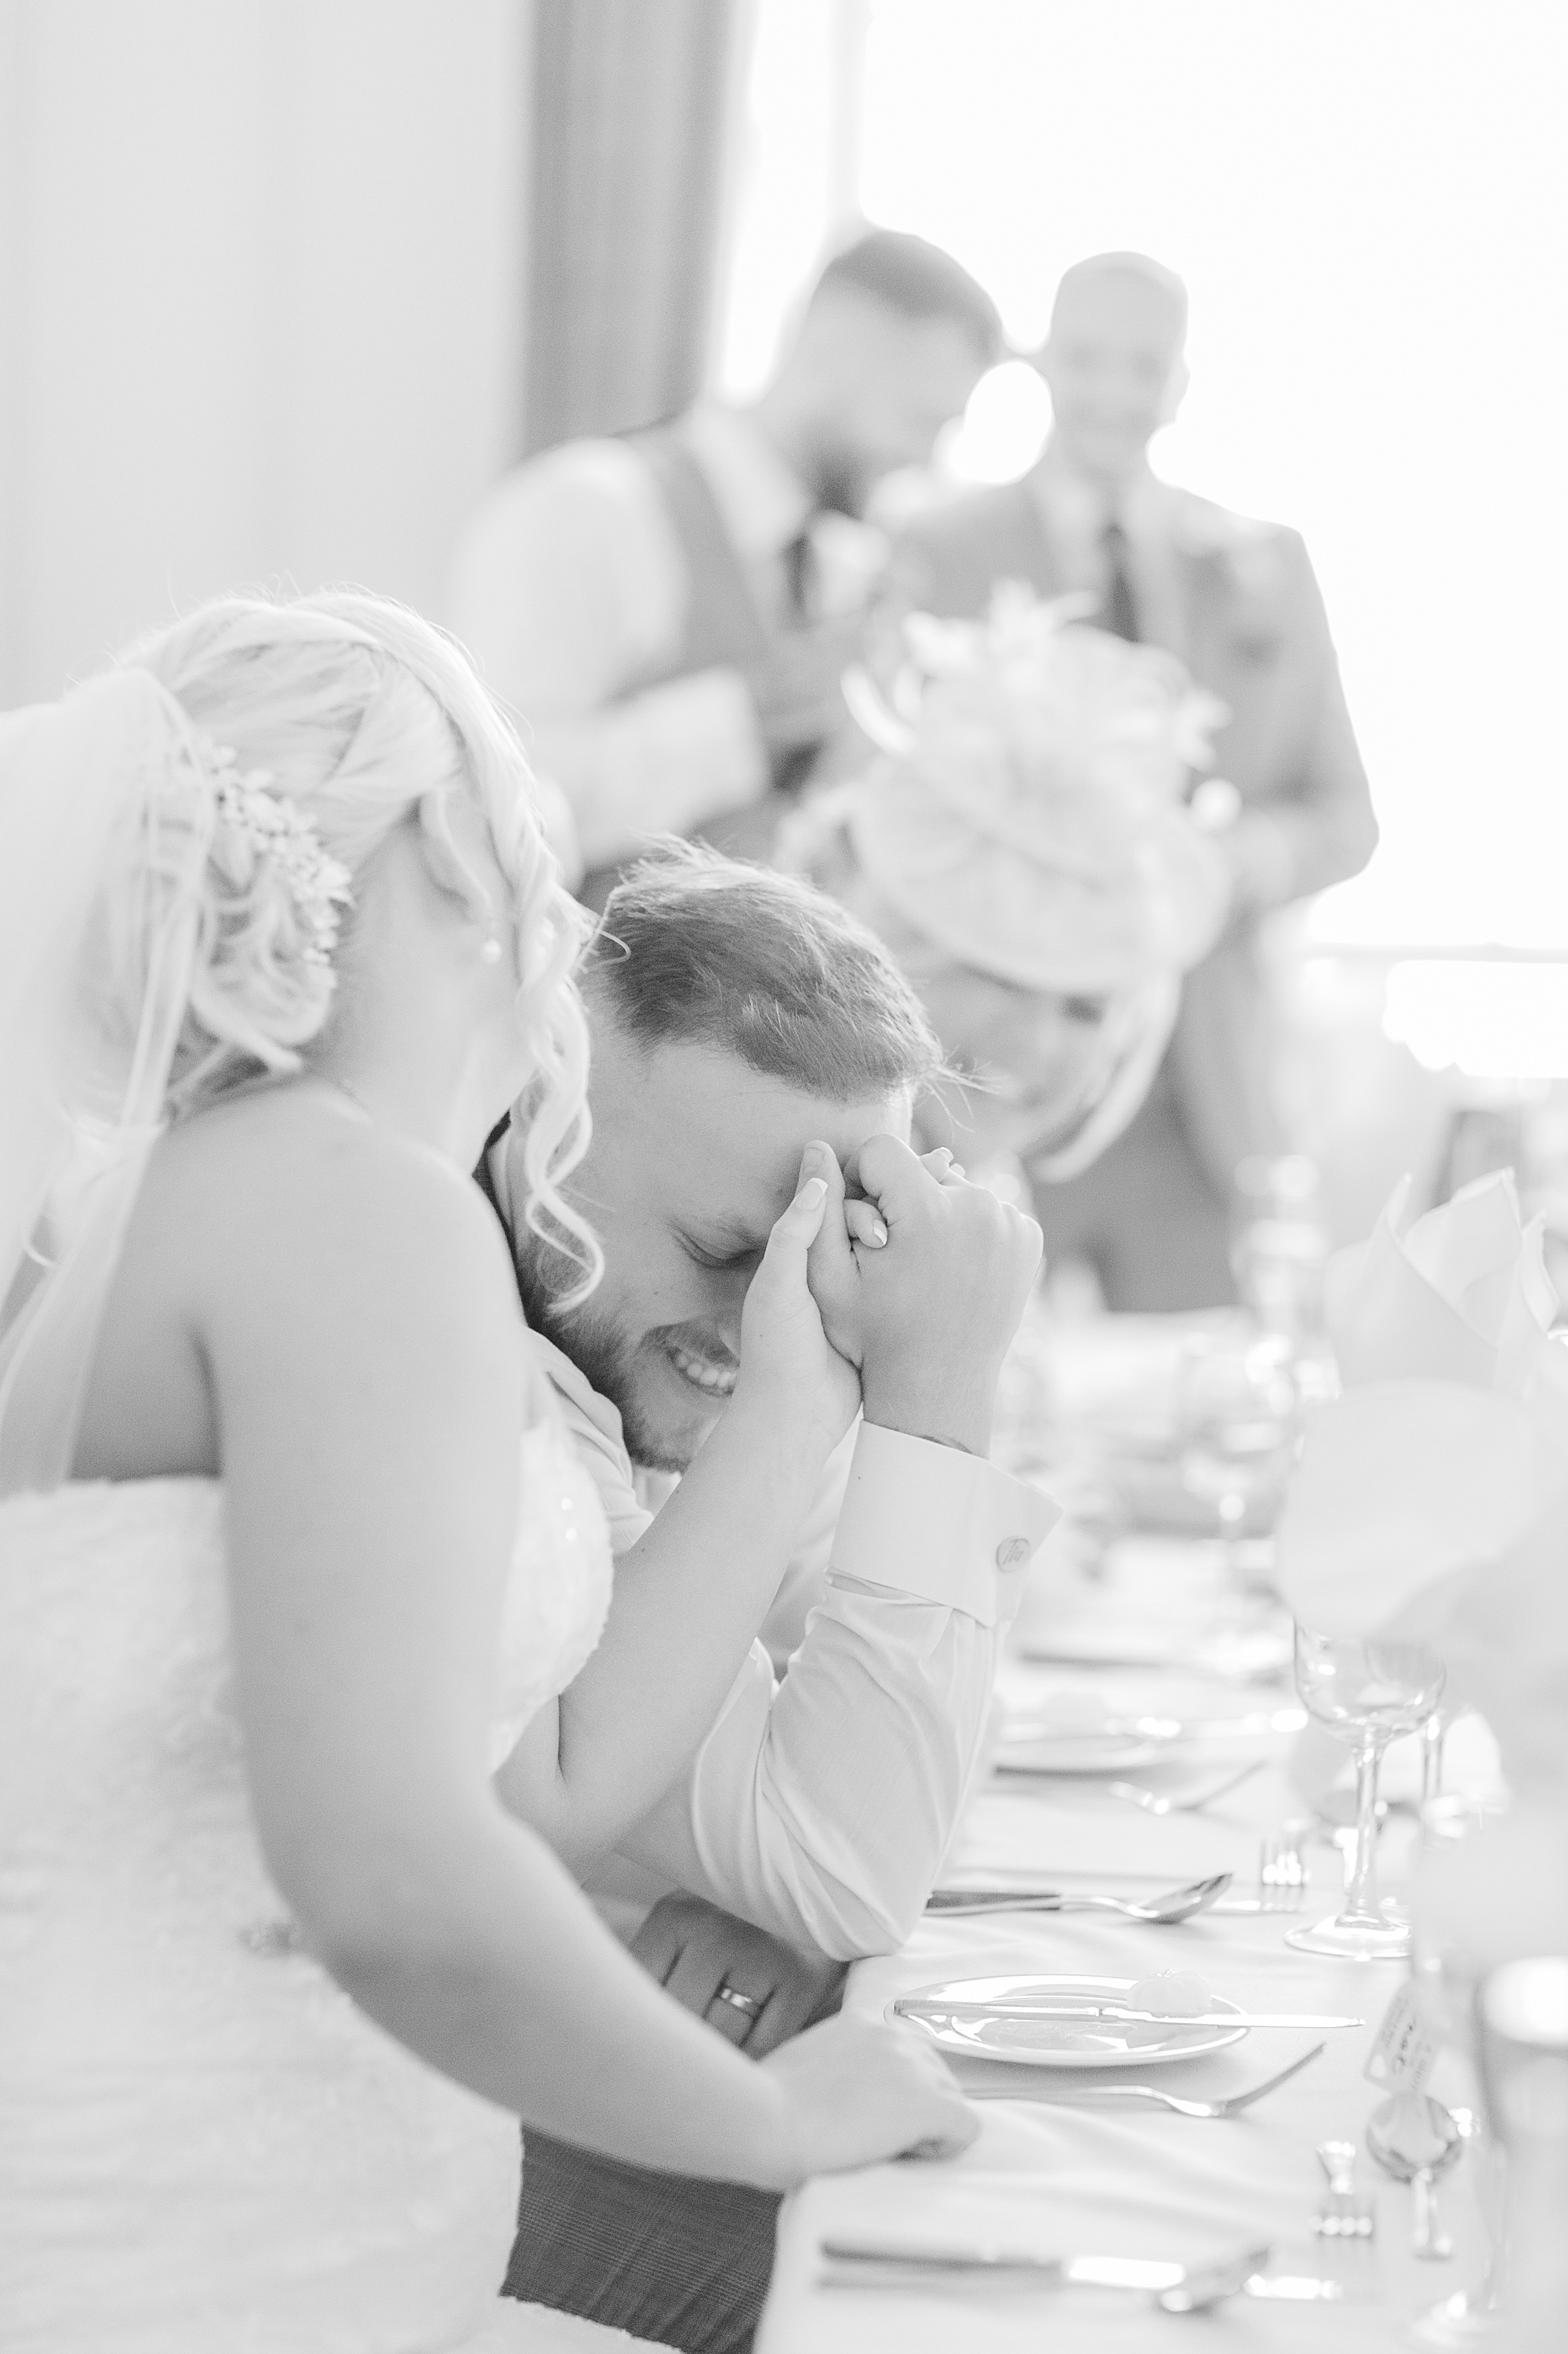 photo of the groom's reaction during the speeches at his wedding